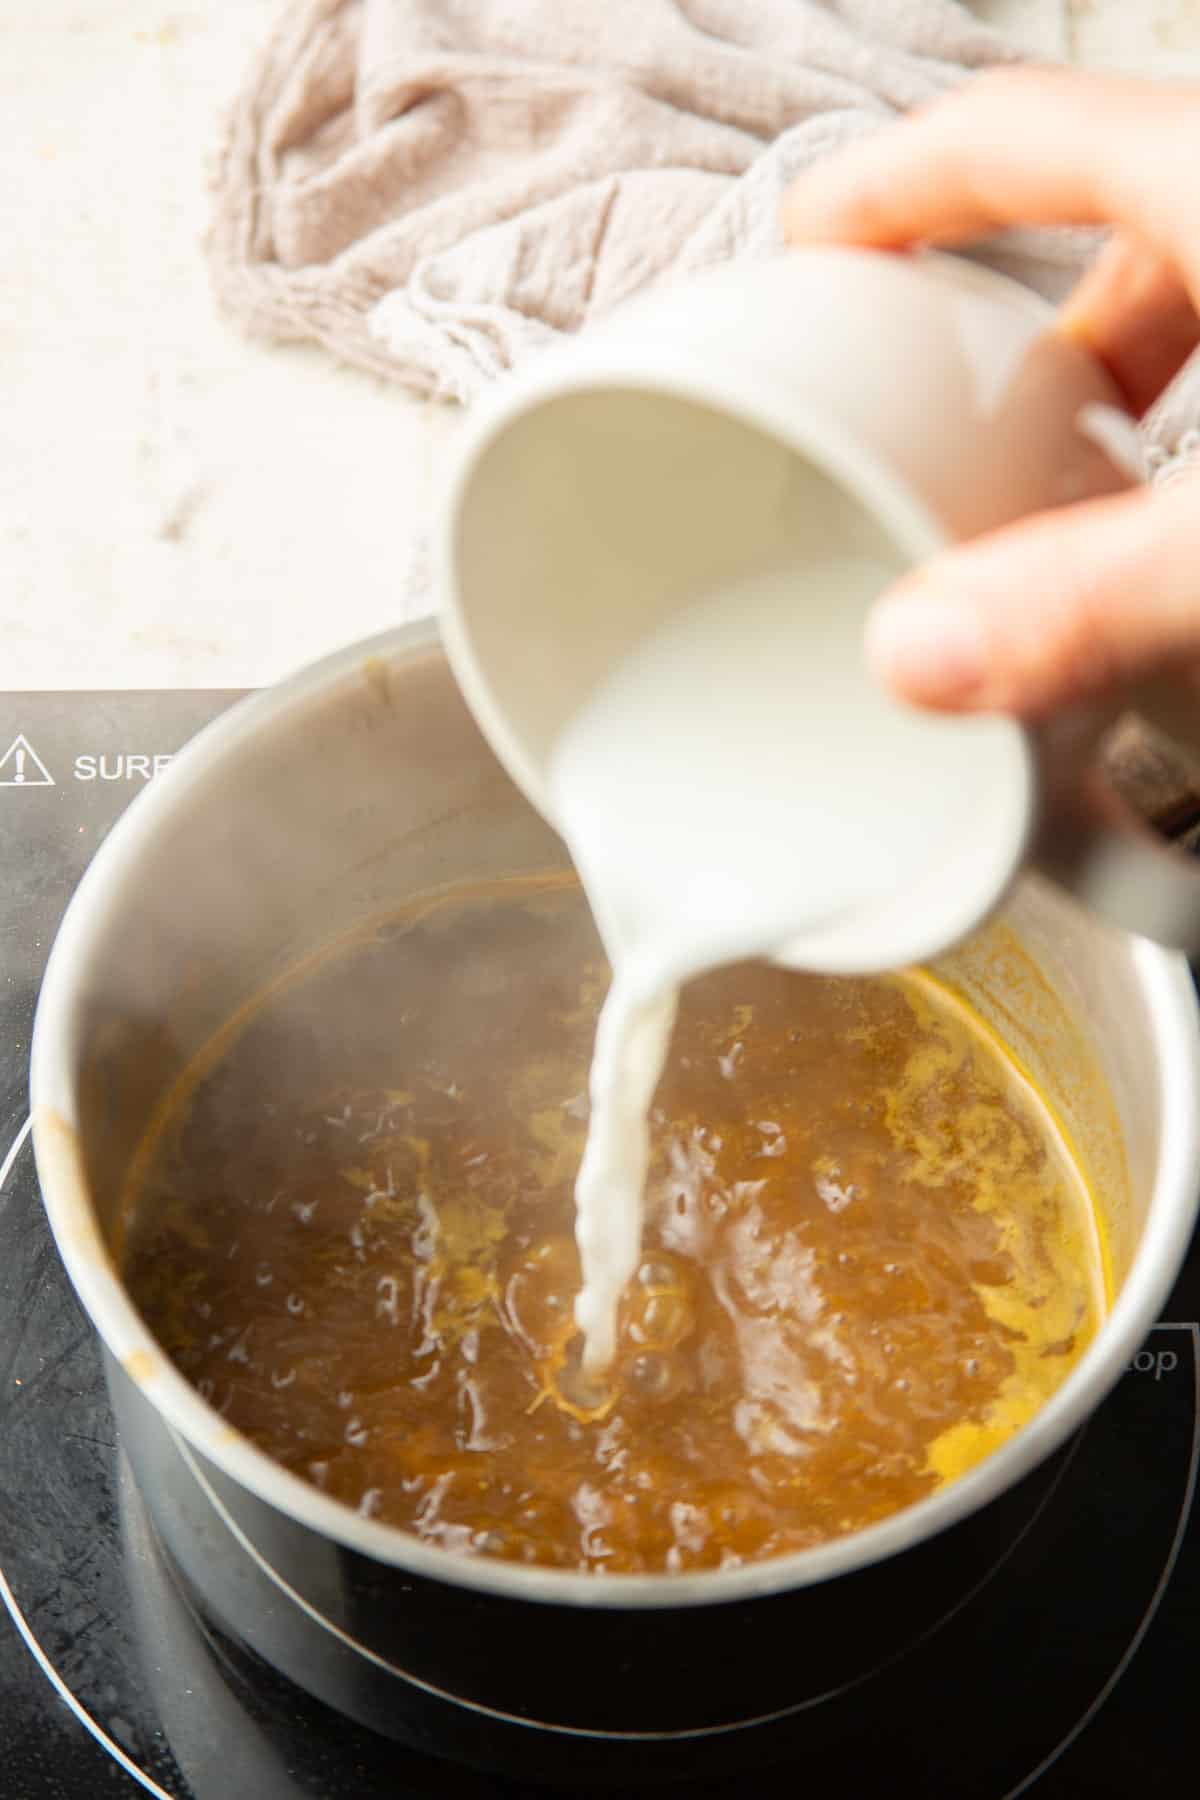 Hand pouring cornstarch slurry into a saucepan of curry sauce.